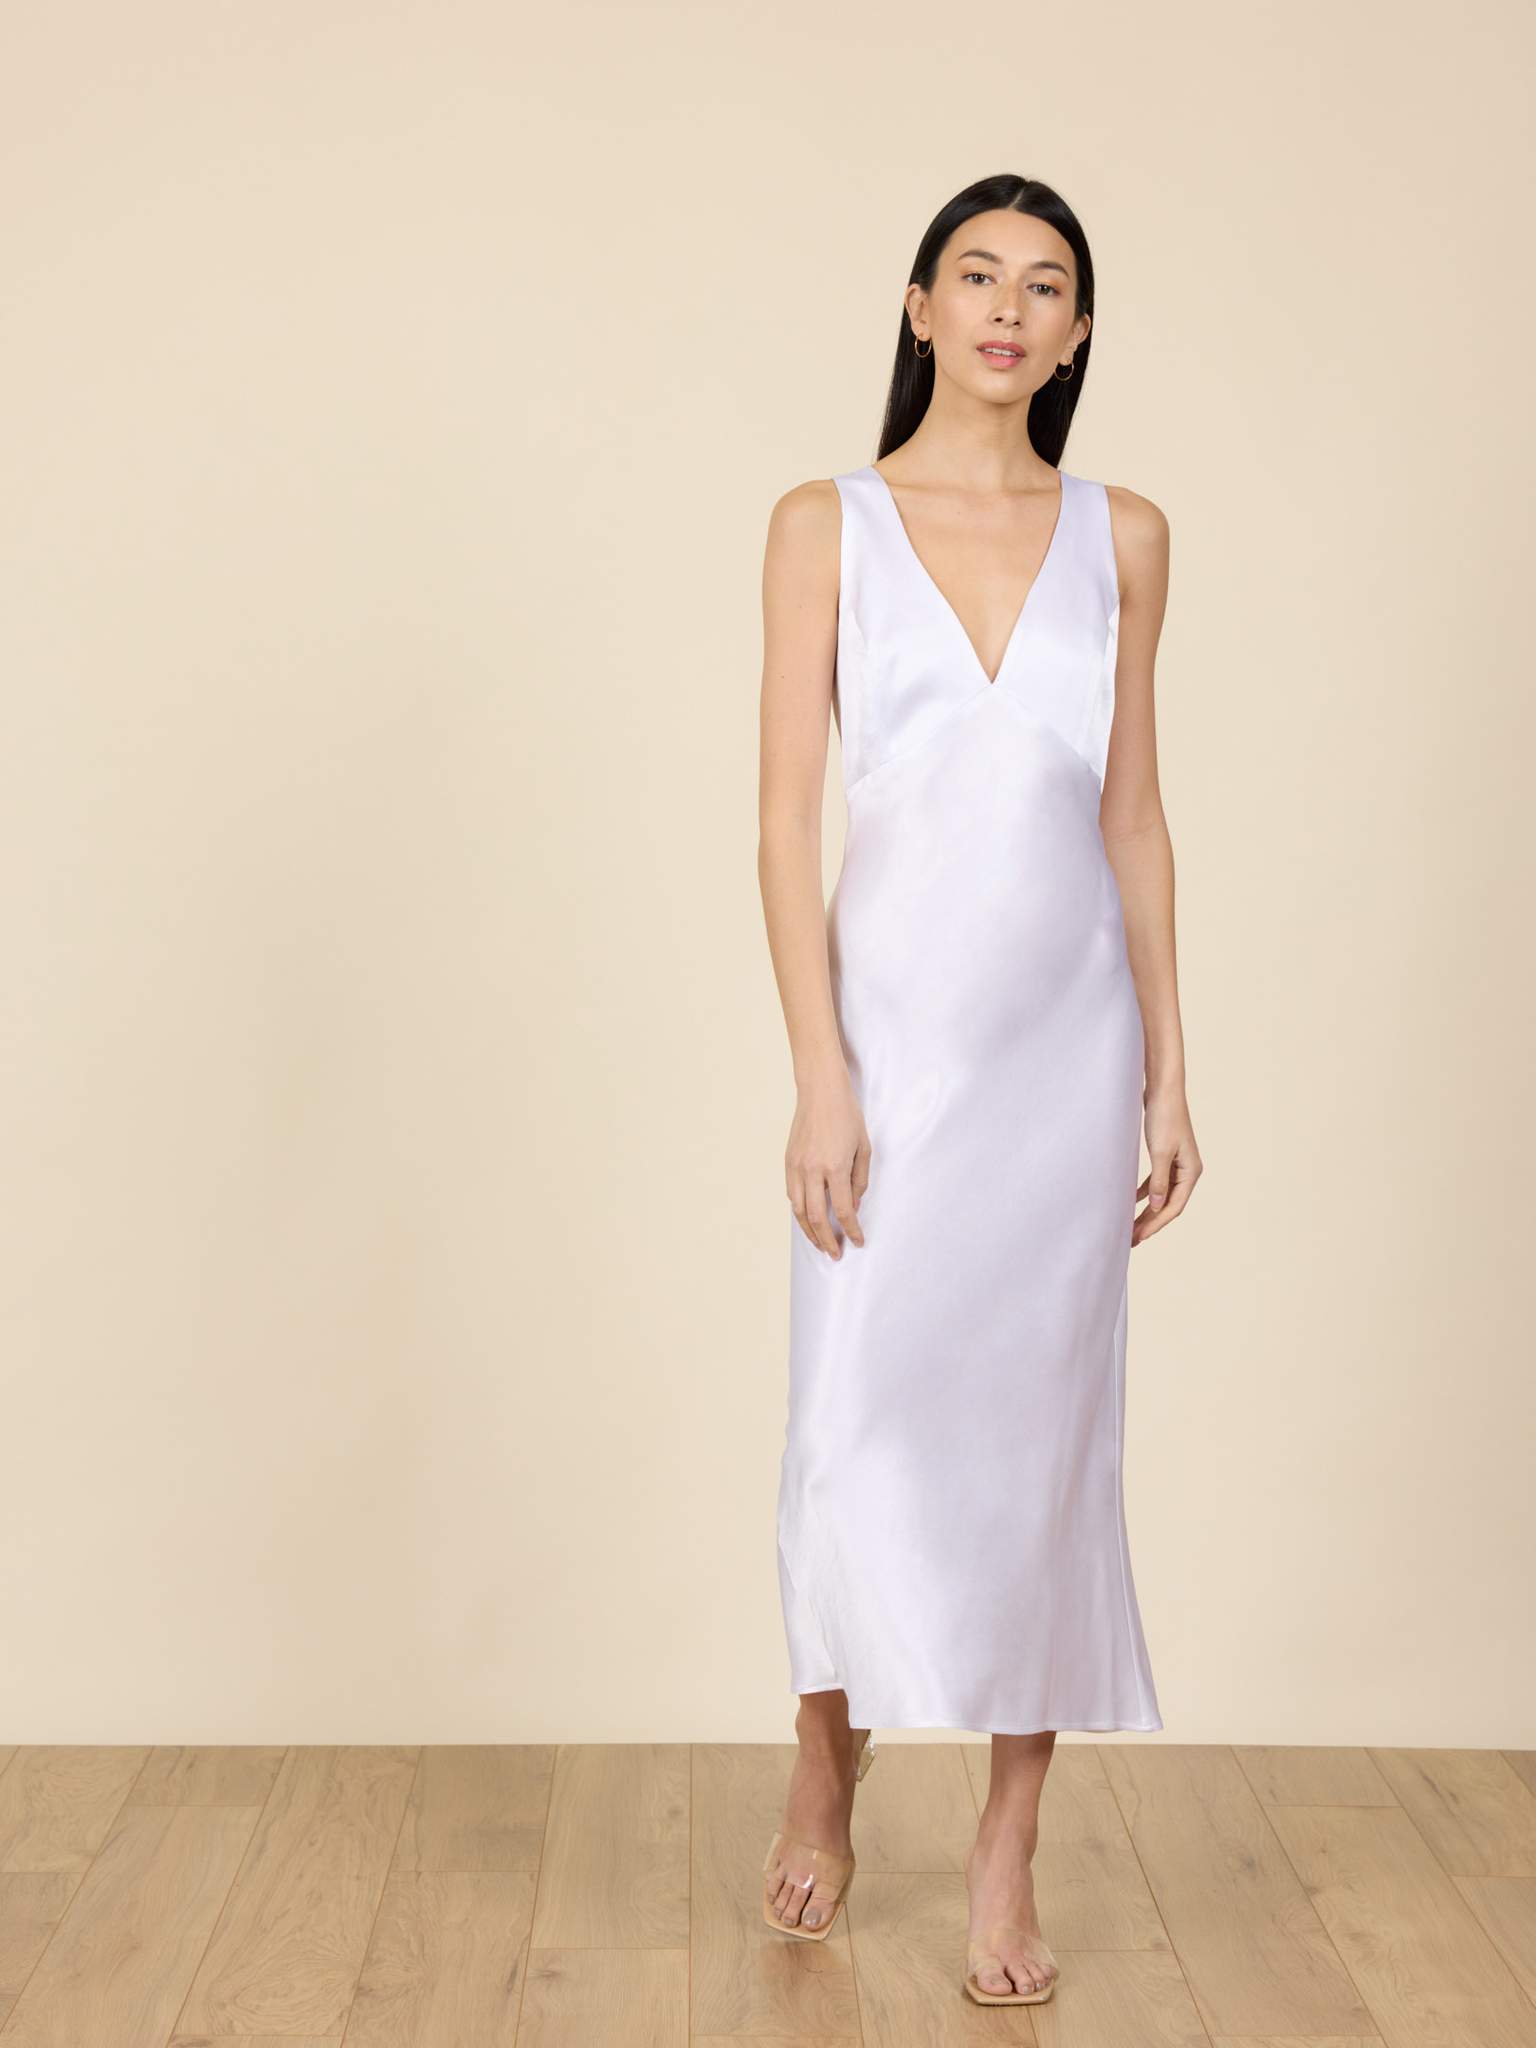 Sexy satin midi gown for your bachelorette party or casual civil ceremony